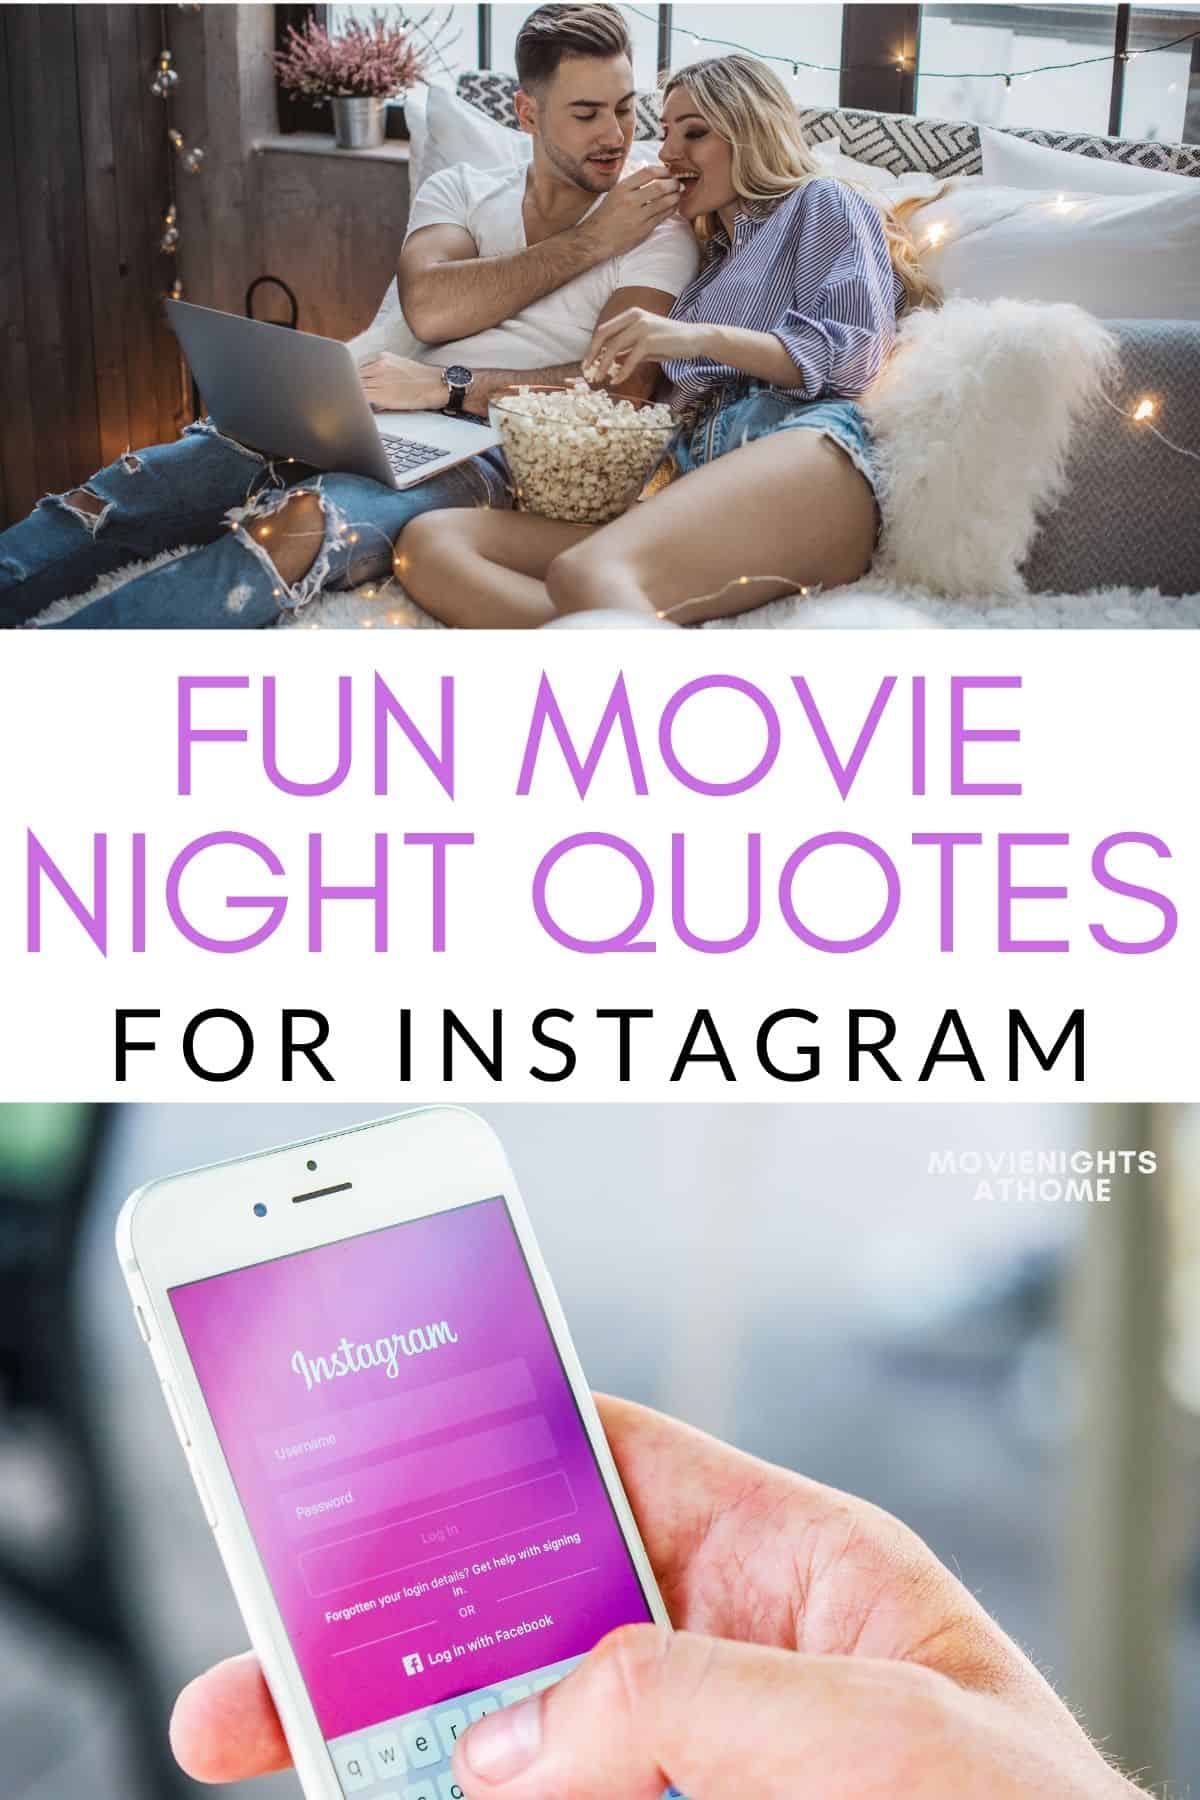 couple sitting on the couch, cuddling. Text overlay "Fun movie night quotes for Instagram"